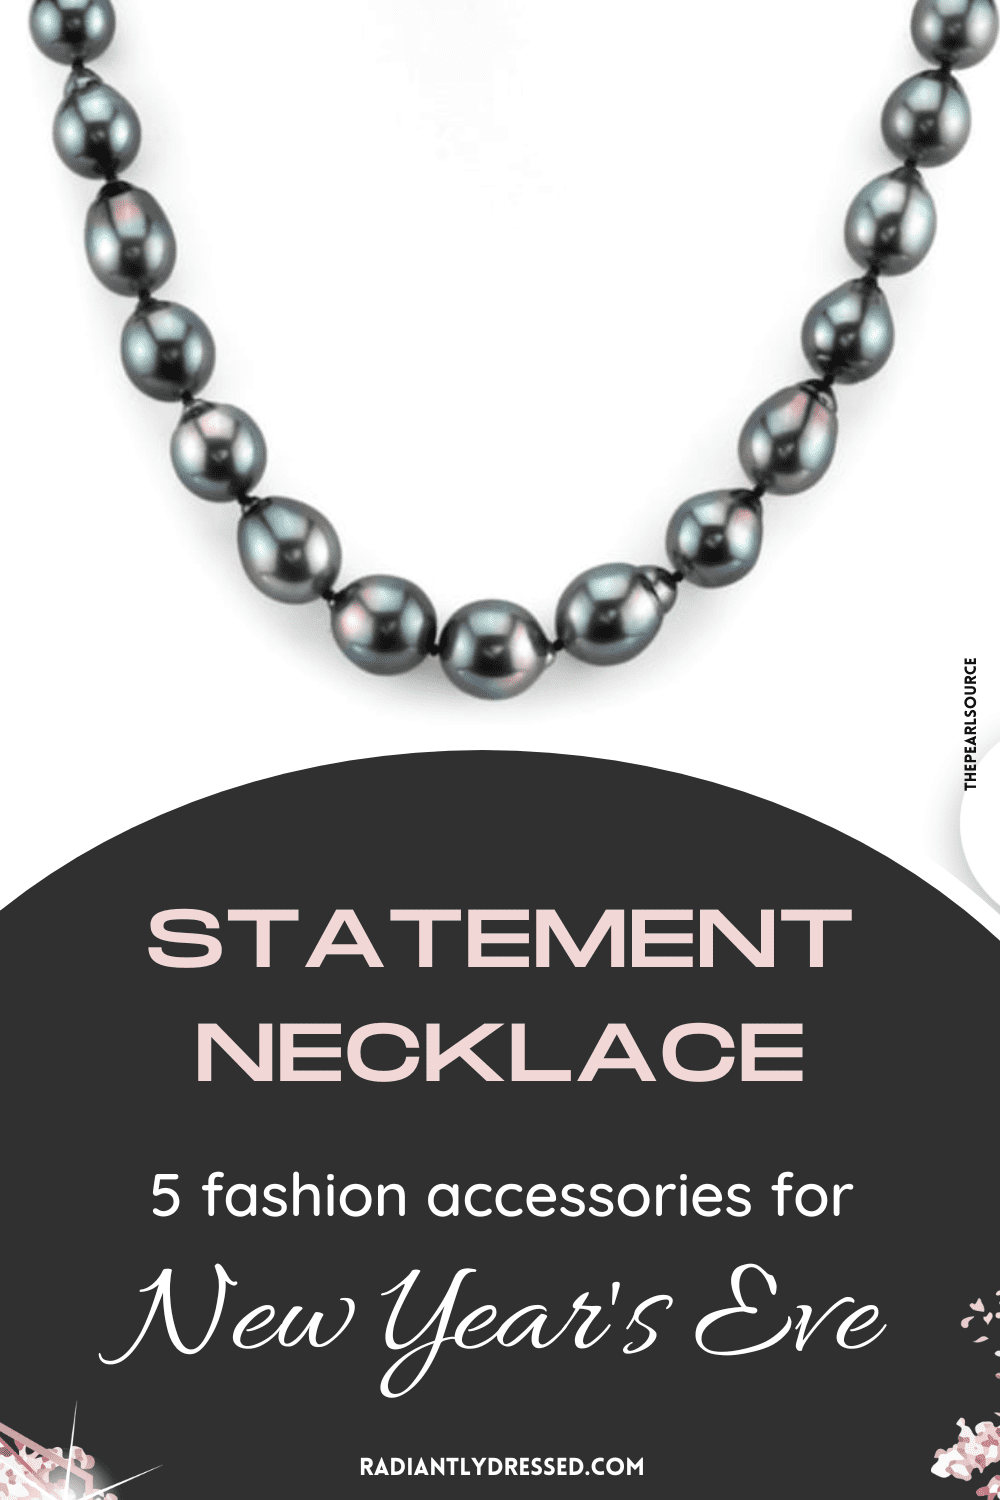 new year's eve accessories statement necklace